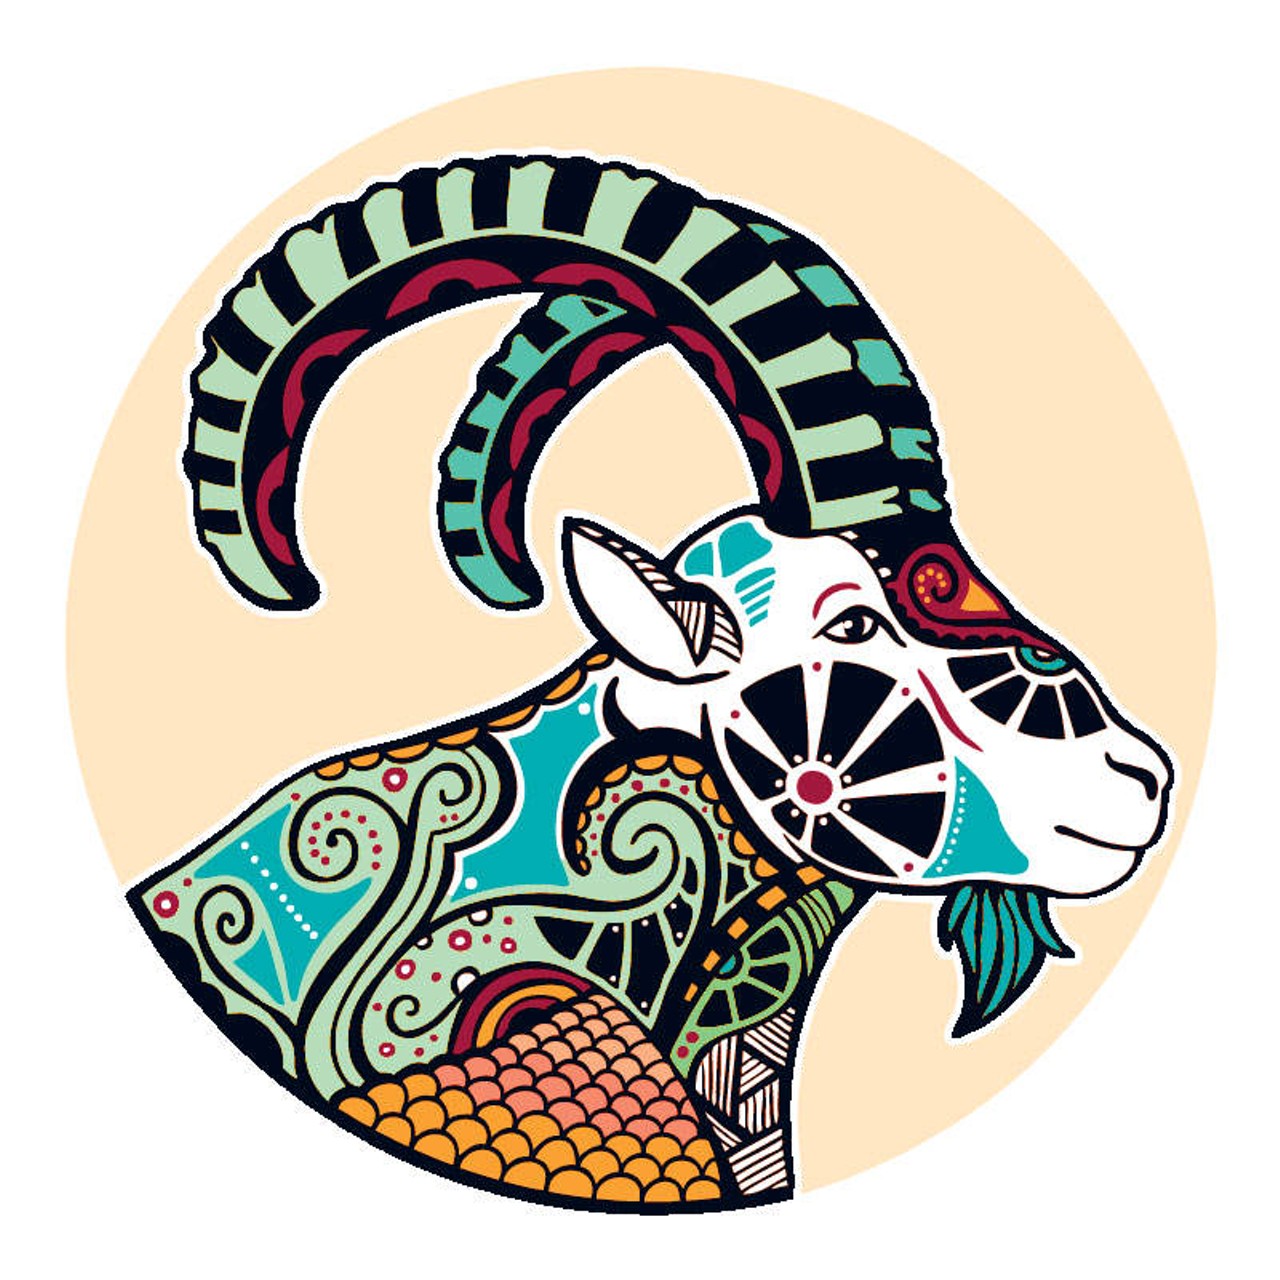 CAPRICORN (Dec. 21-Jan. 20): 
Going into any new territory, it&#146;s wise to take baby steps. When you&#146;re playing with fire, it&#146;s even more essential to take it slow. If you thought this would all come together in a heartbeat you see now that there&#146;s some groundwork yet to be laid. Going back to things that you&#146;ve done before in order to keep the home fires burning will do wonders for your attitude and give you a perspective on the virtues of looking for slow progress in limited areas. Power issues underlie the current scenario. Keep those things in check, and don&#146;t let other people lord their stuff over you.